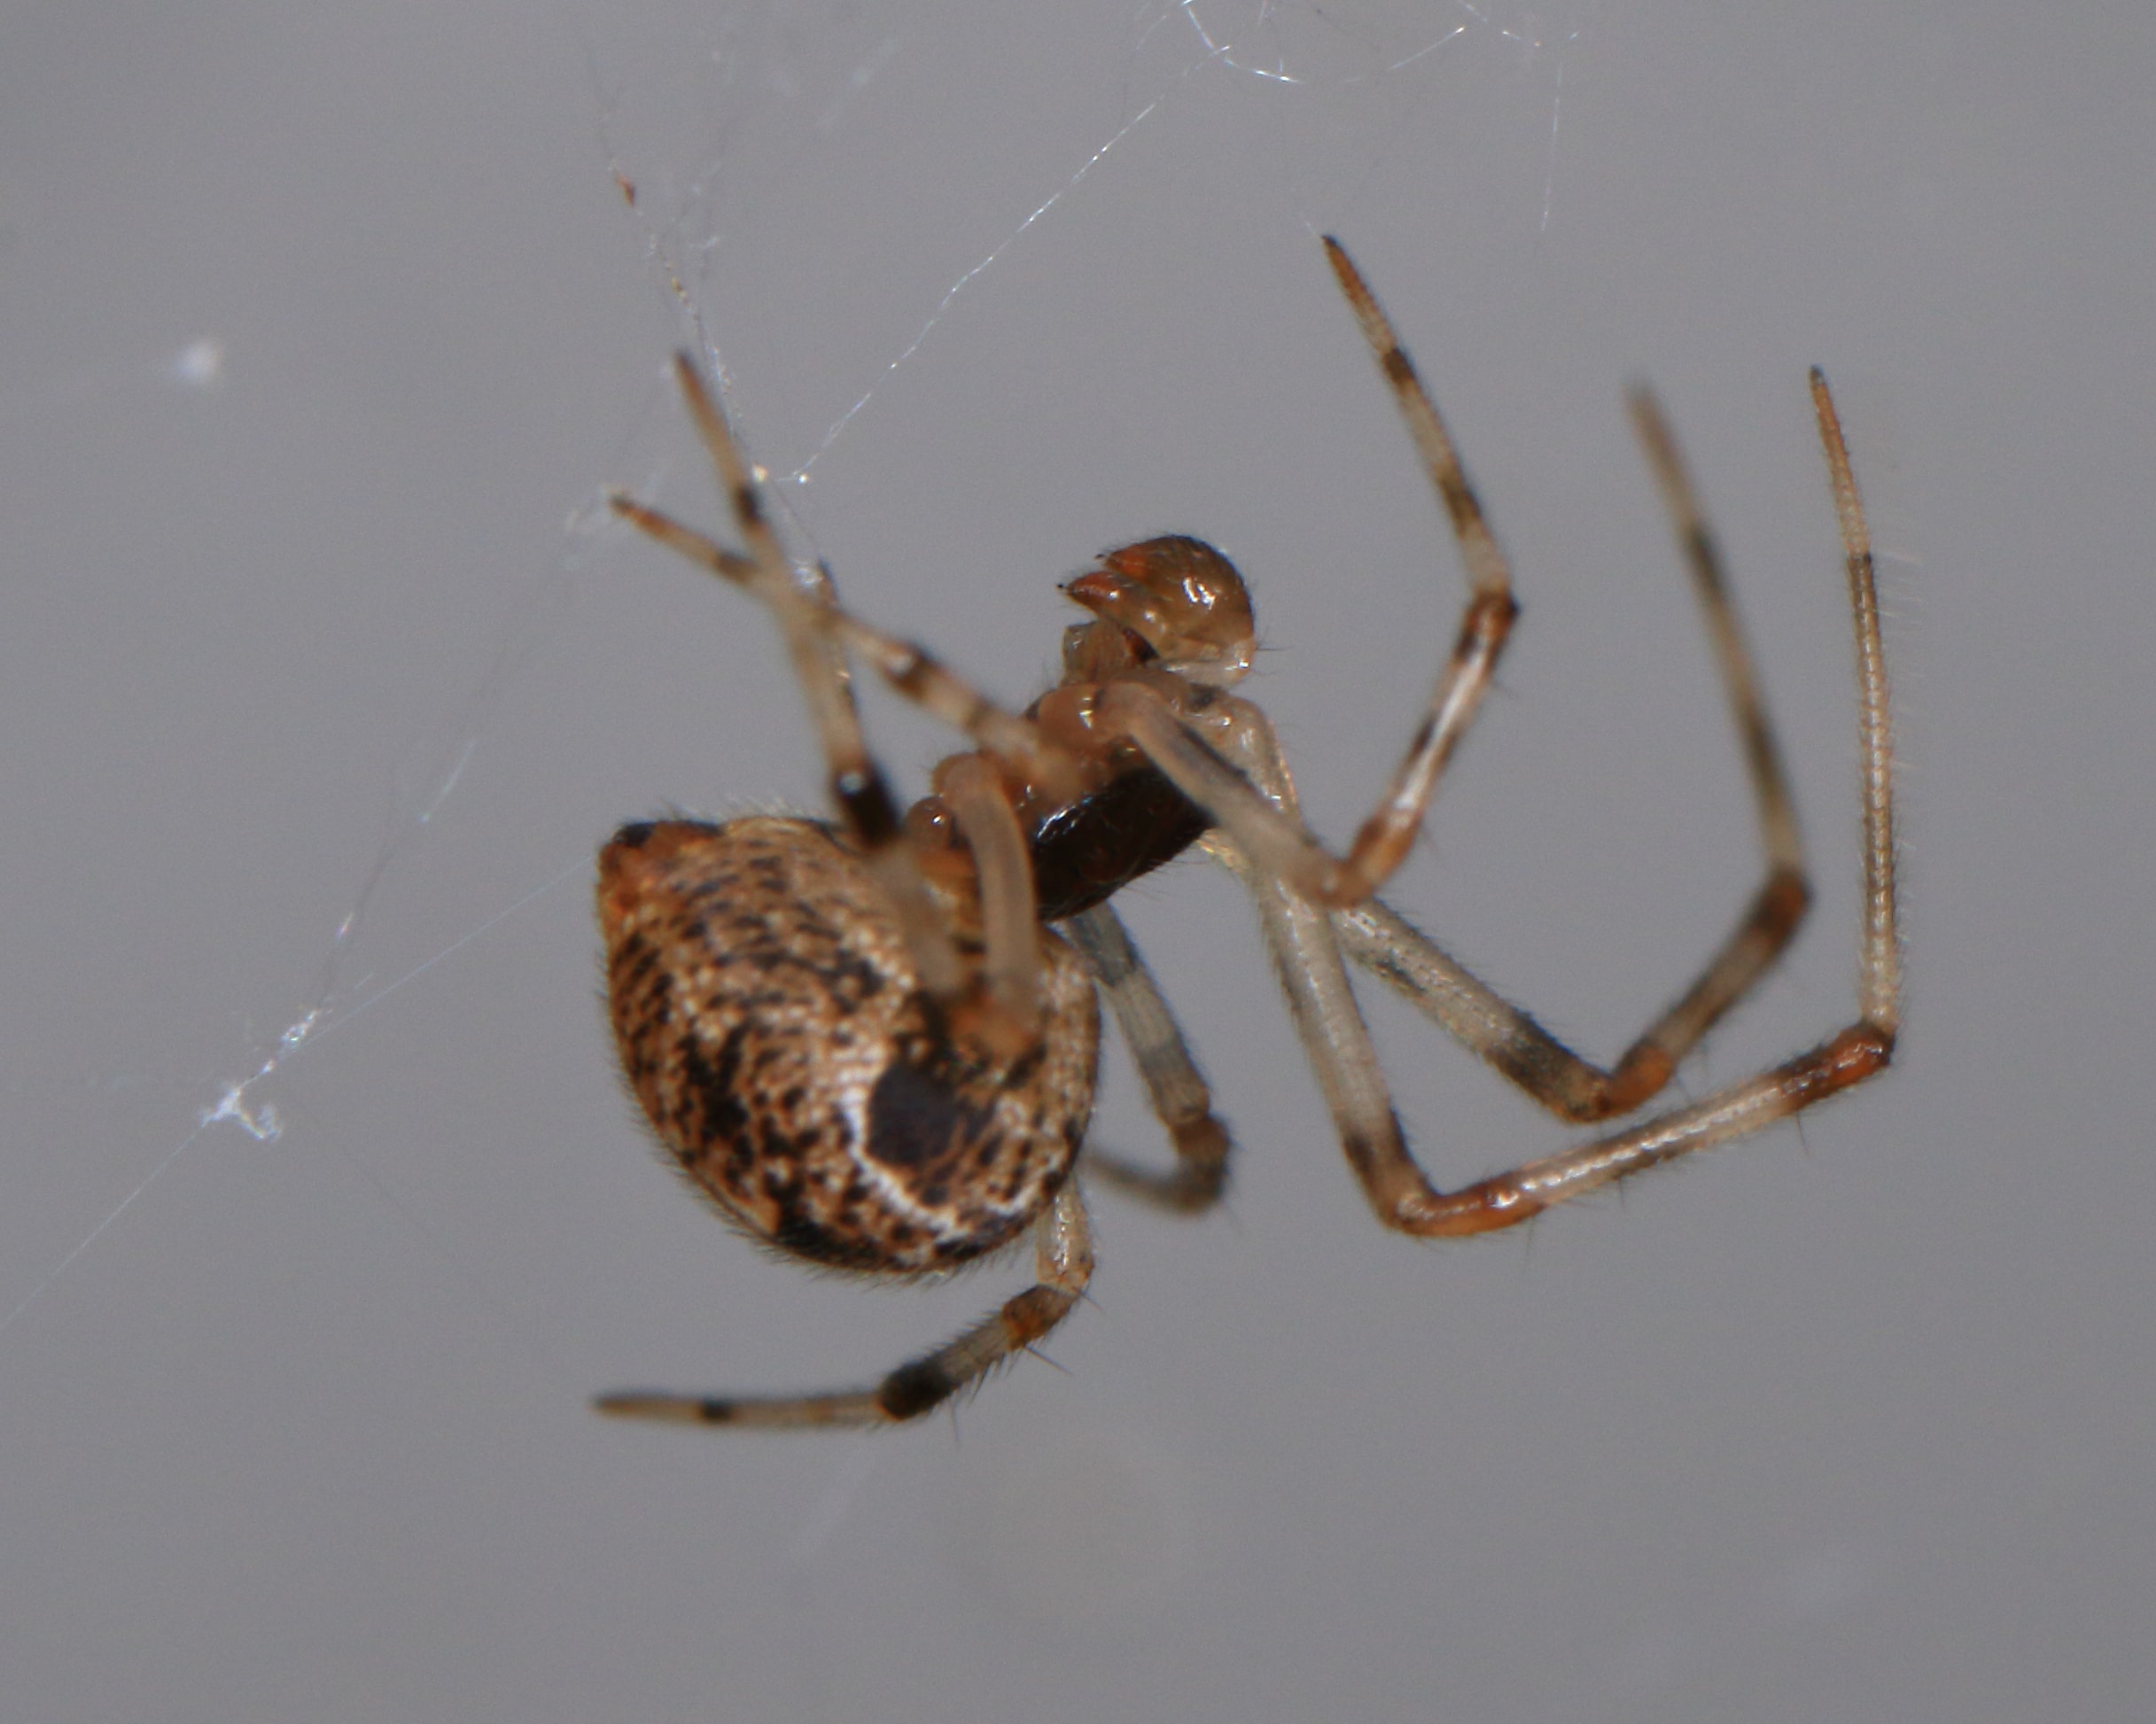 Picture of Parasteatoda tepidariorum (Common House Spider) - Male - Lateral,Webs